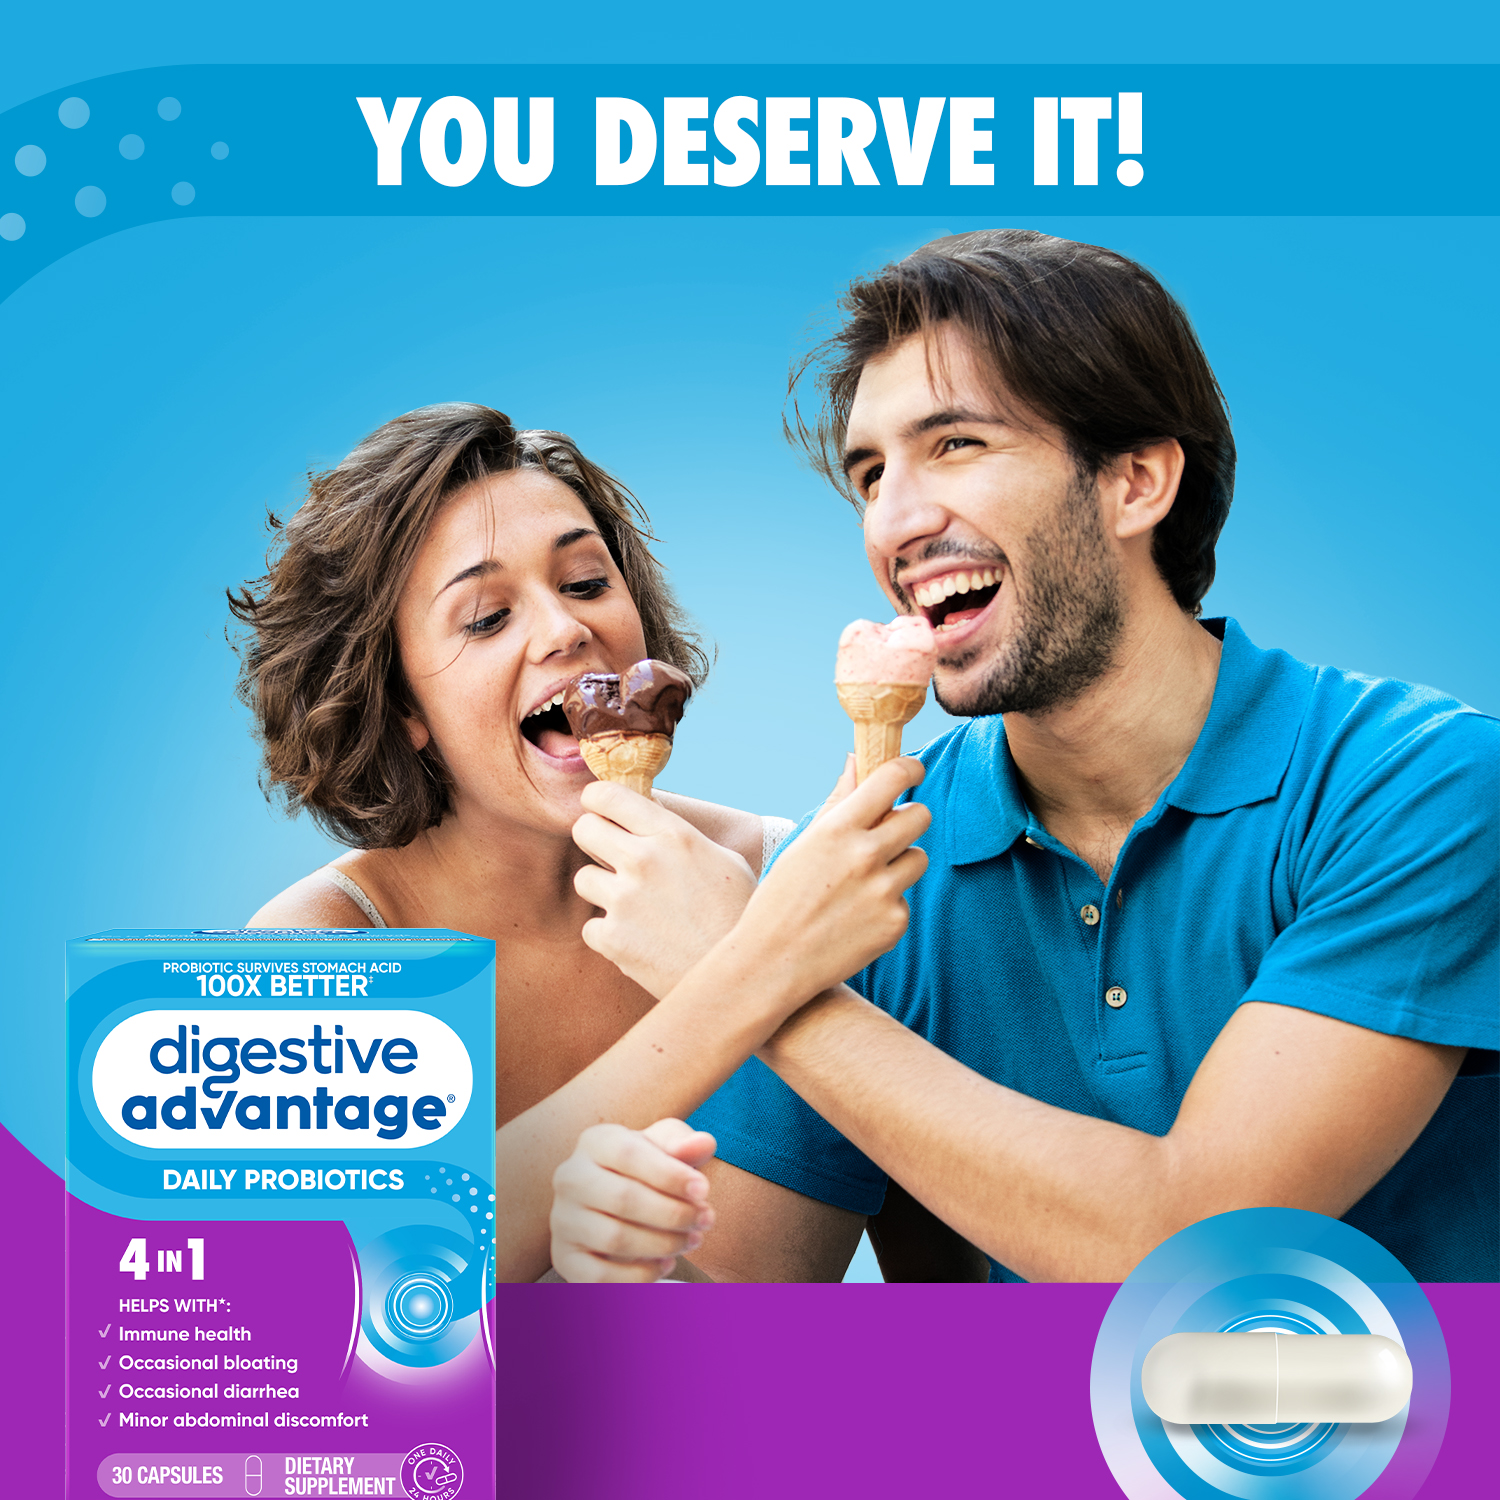 Digestive Advantage Daily Probiotic, Survives Better than 50 Billion - 30 Capsules - image 5 of 8